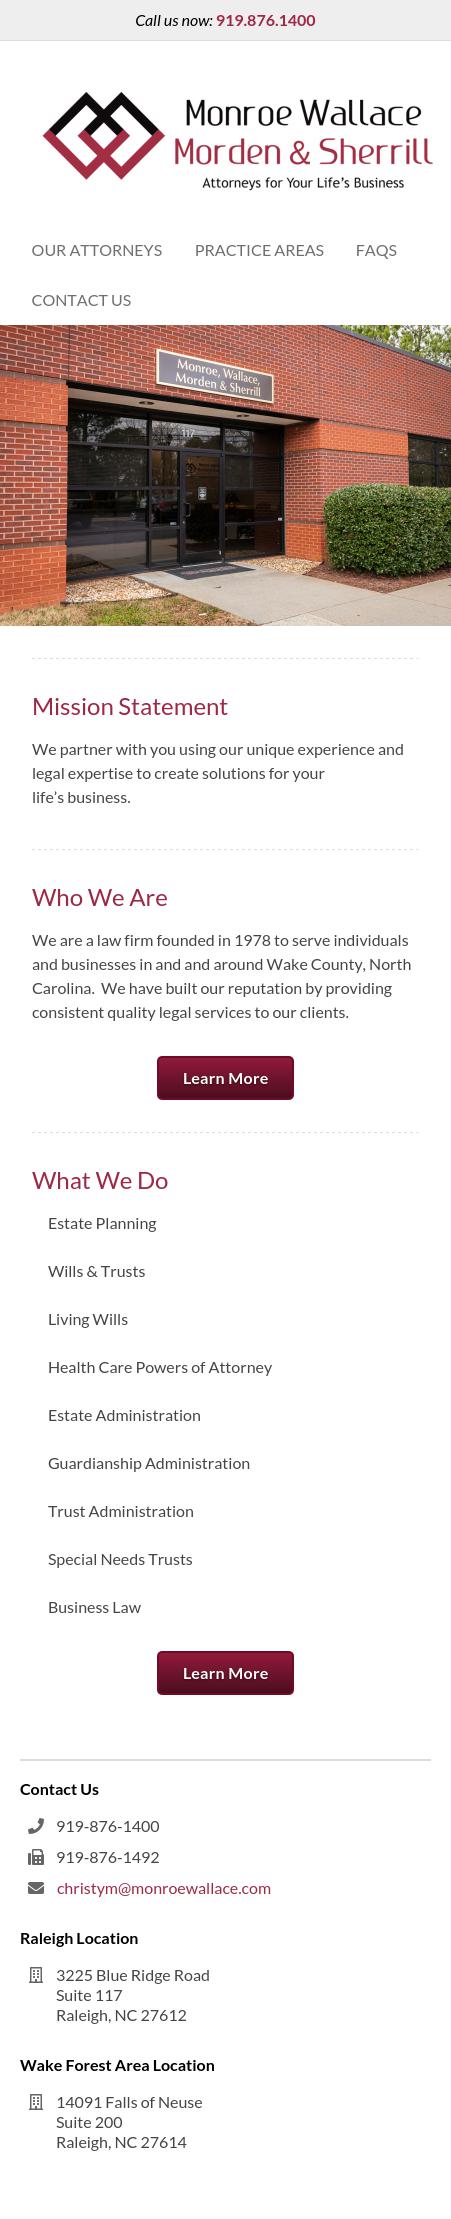 Monroe Wallace Law Group - Raleigh NC Lawyers